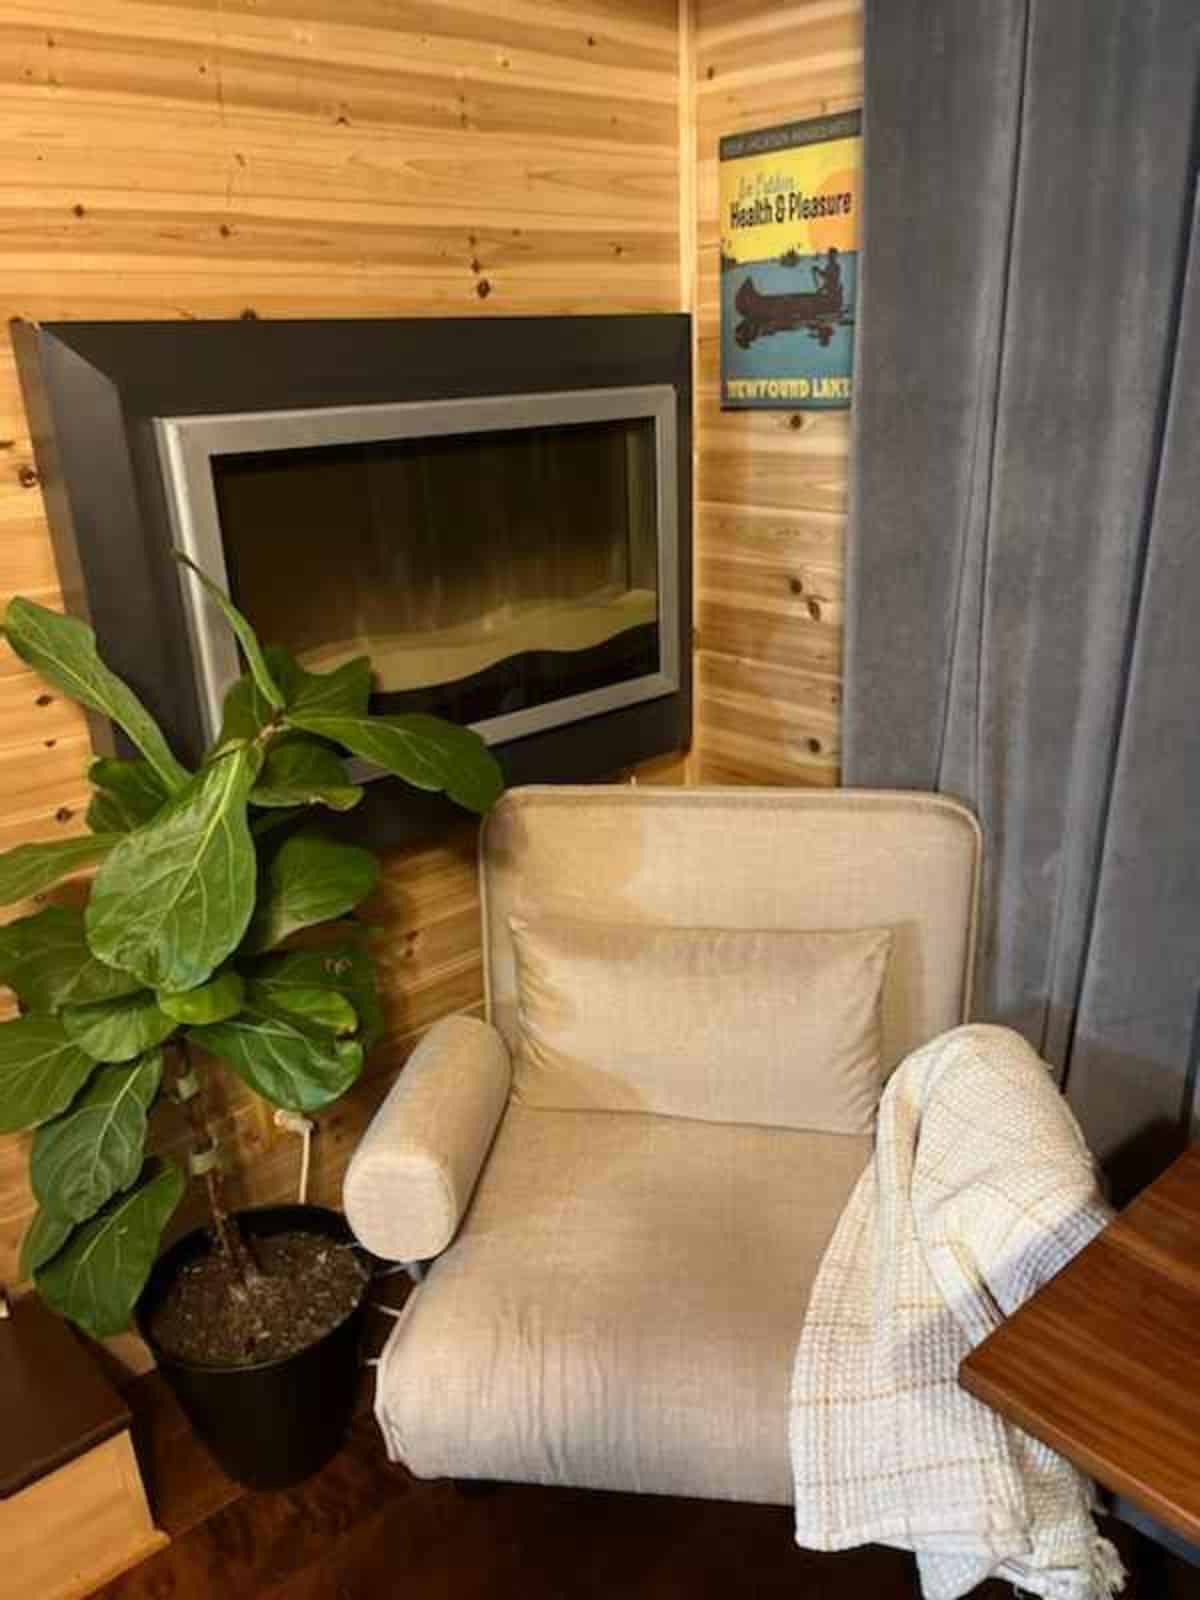 Single seater convertible sleeper chair and fireplace in the living area